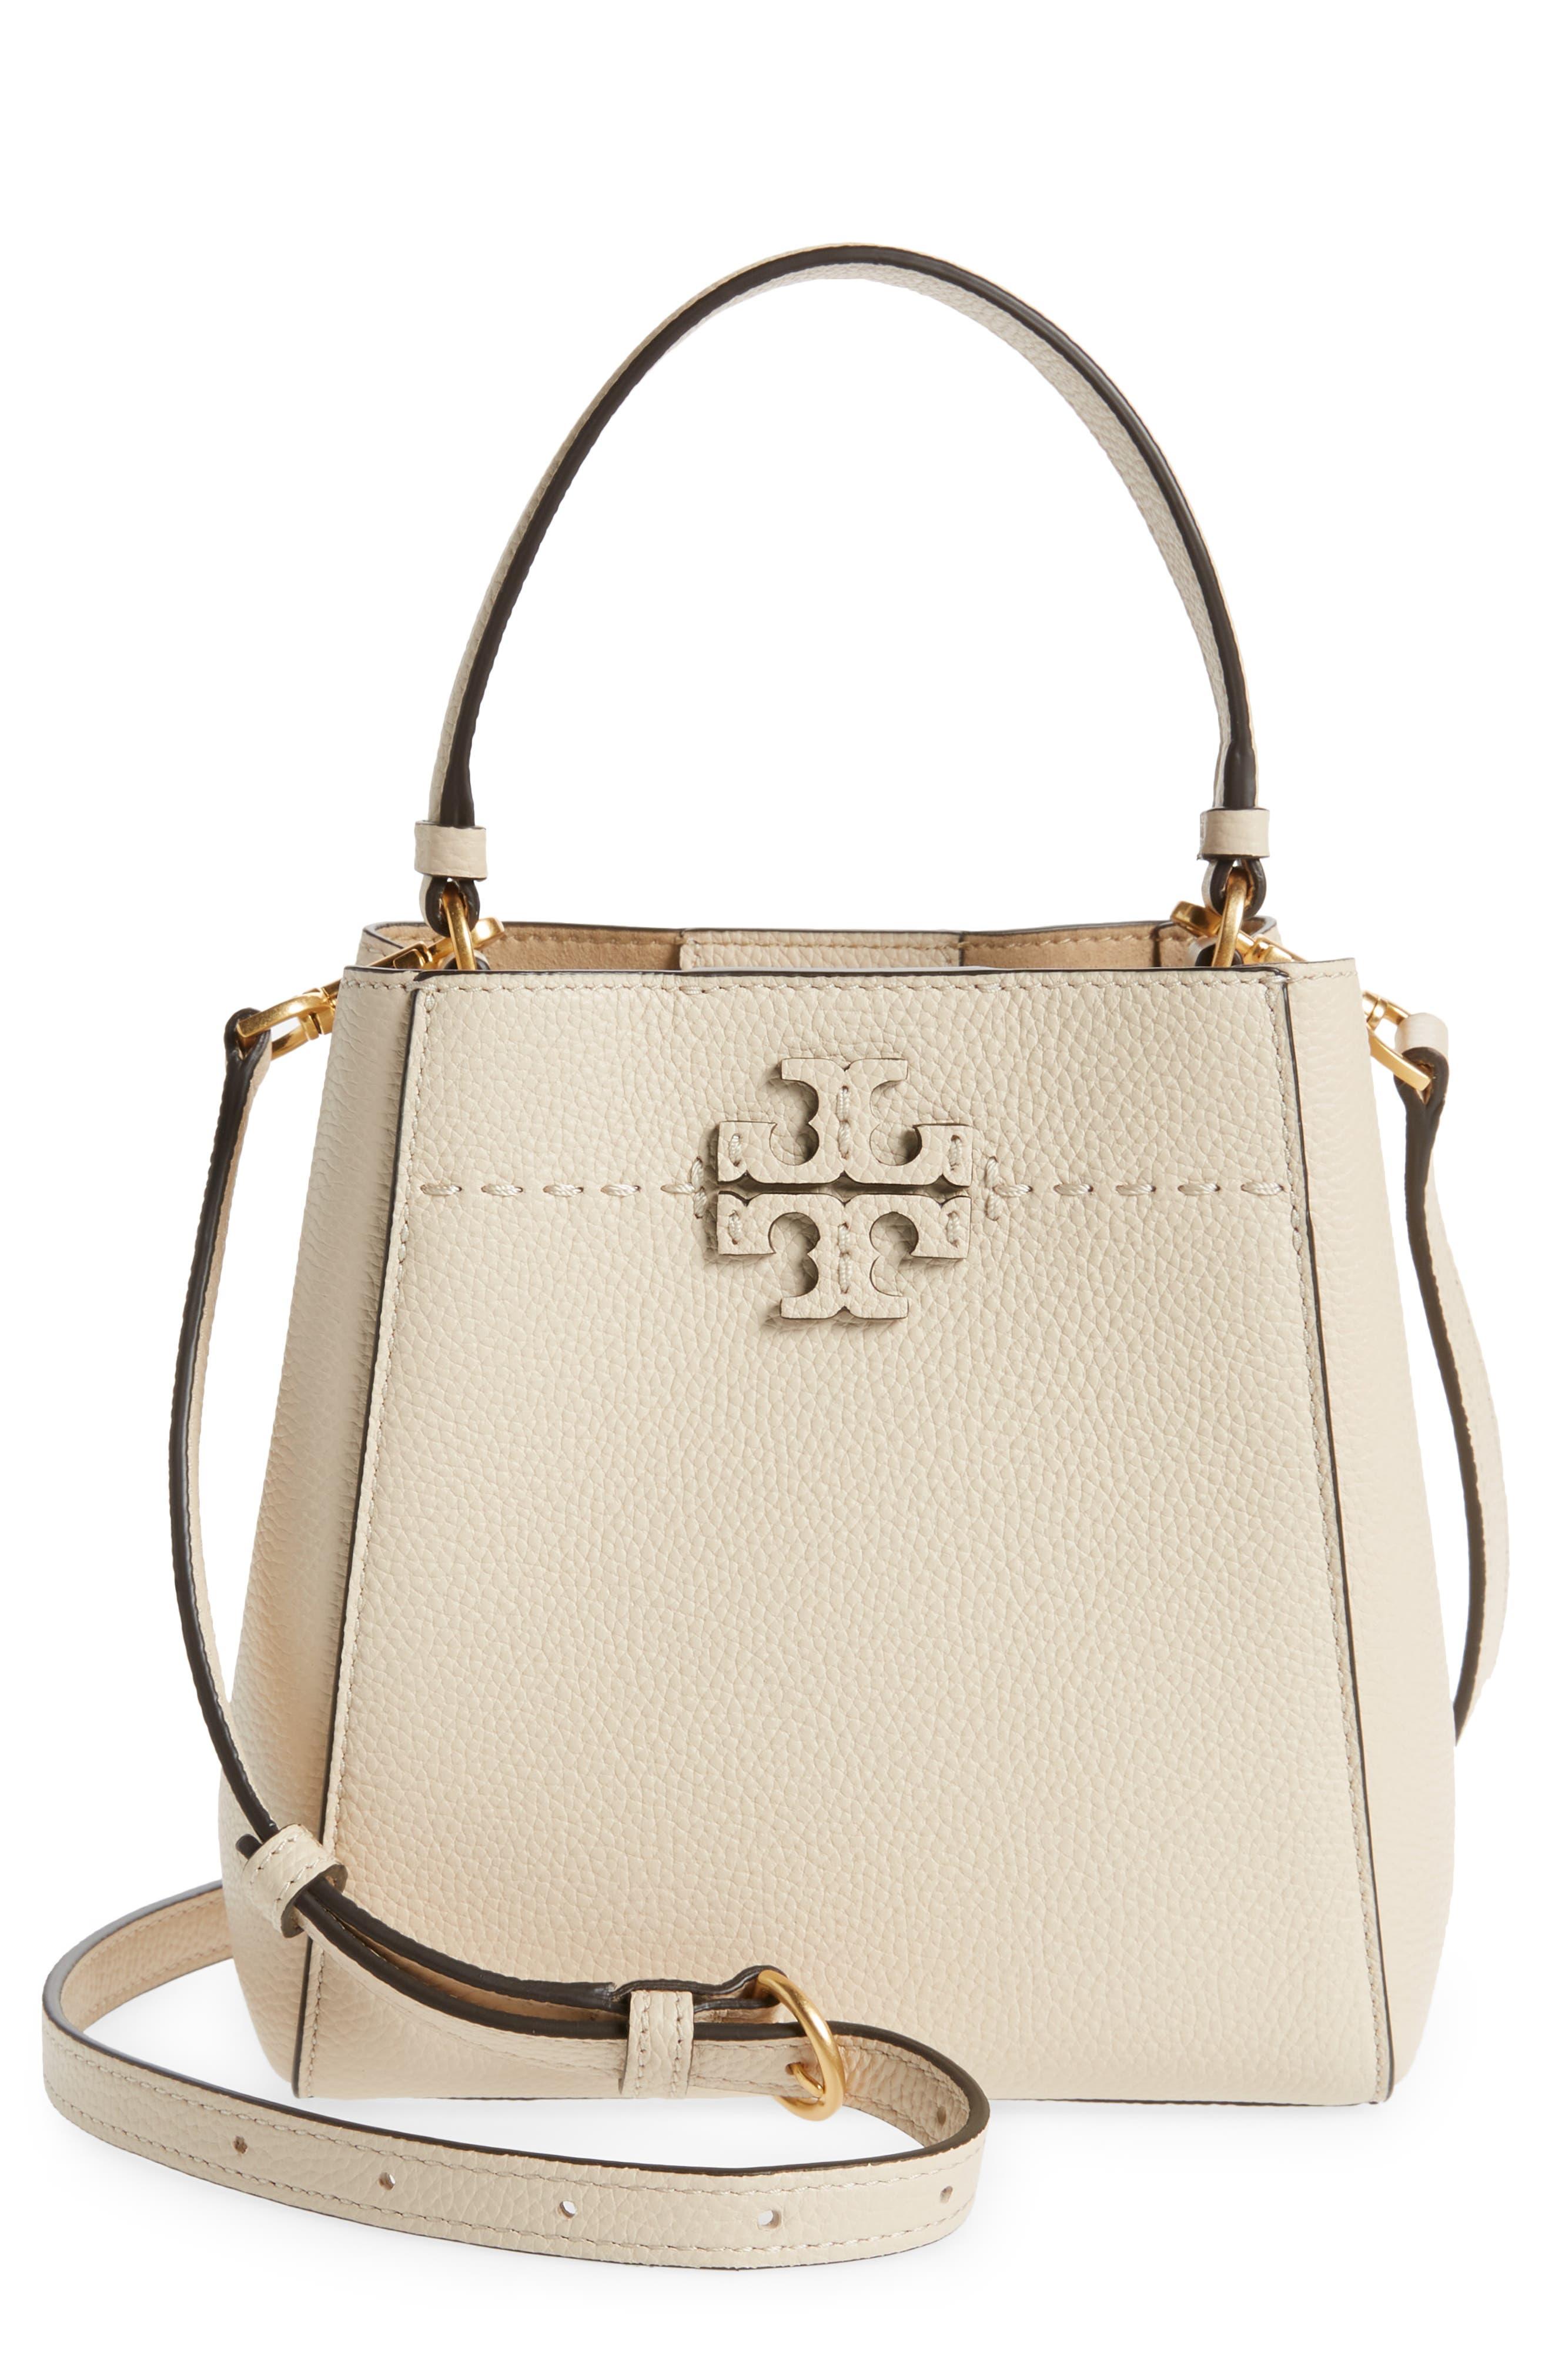 Tory Burch Mcgraw Small Leather Bucket Bag in Natural | Lyst